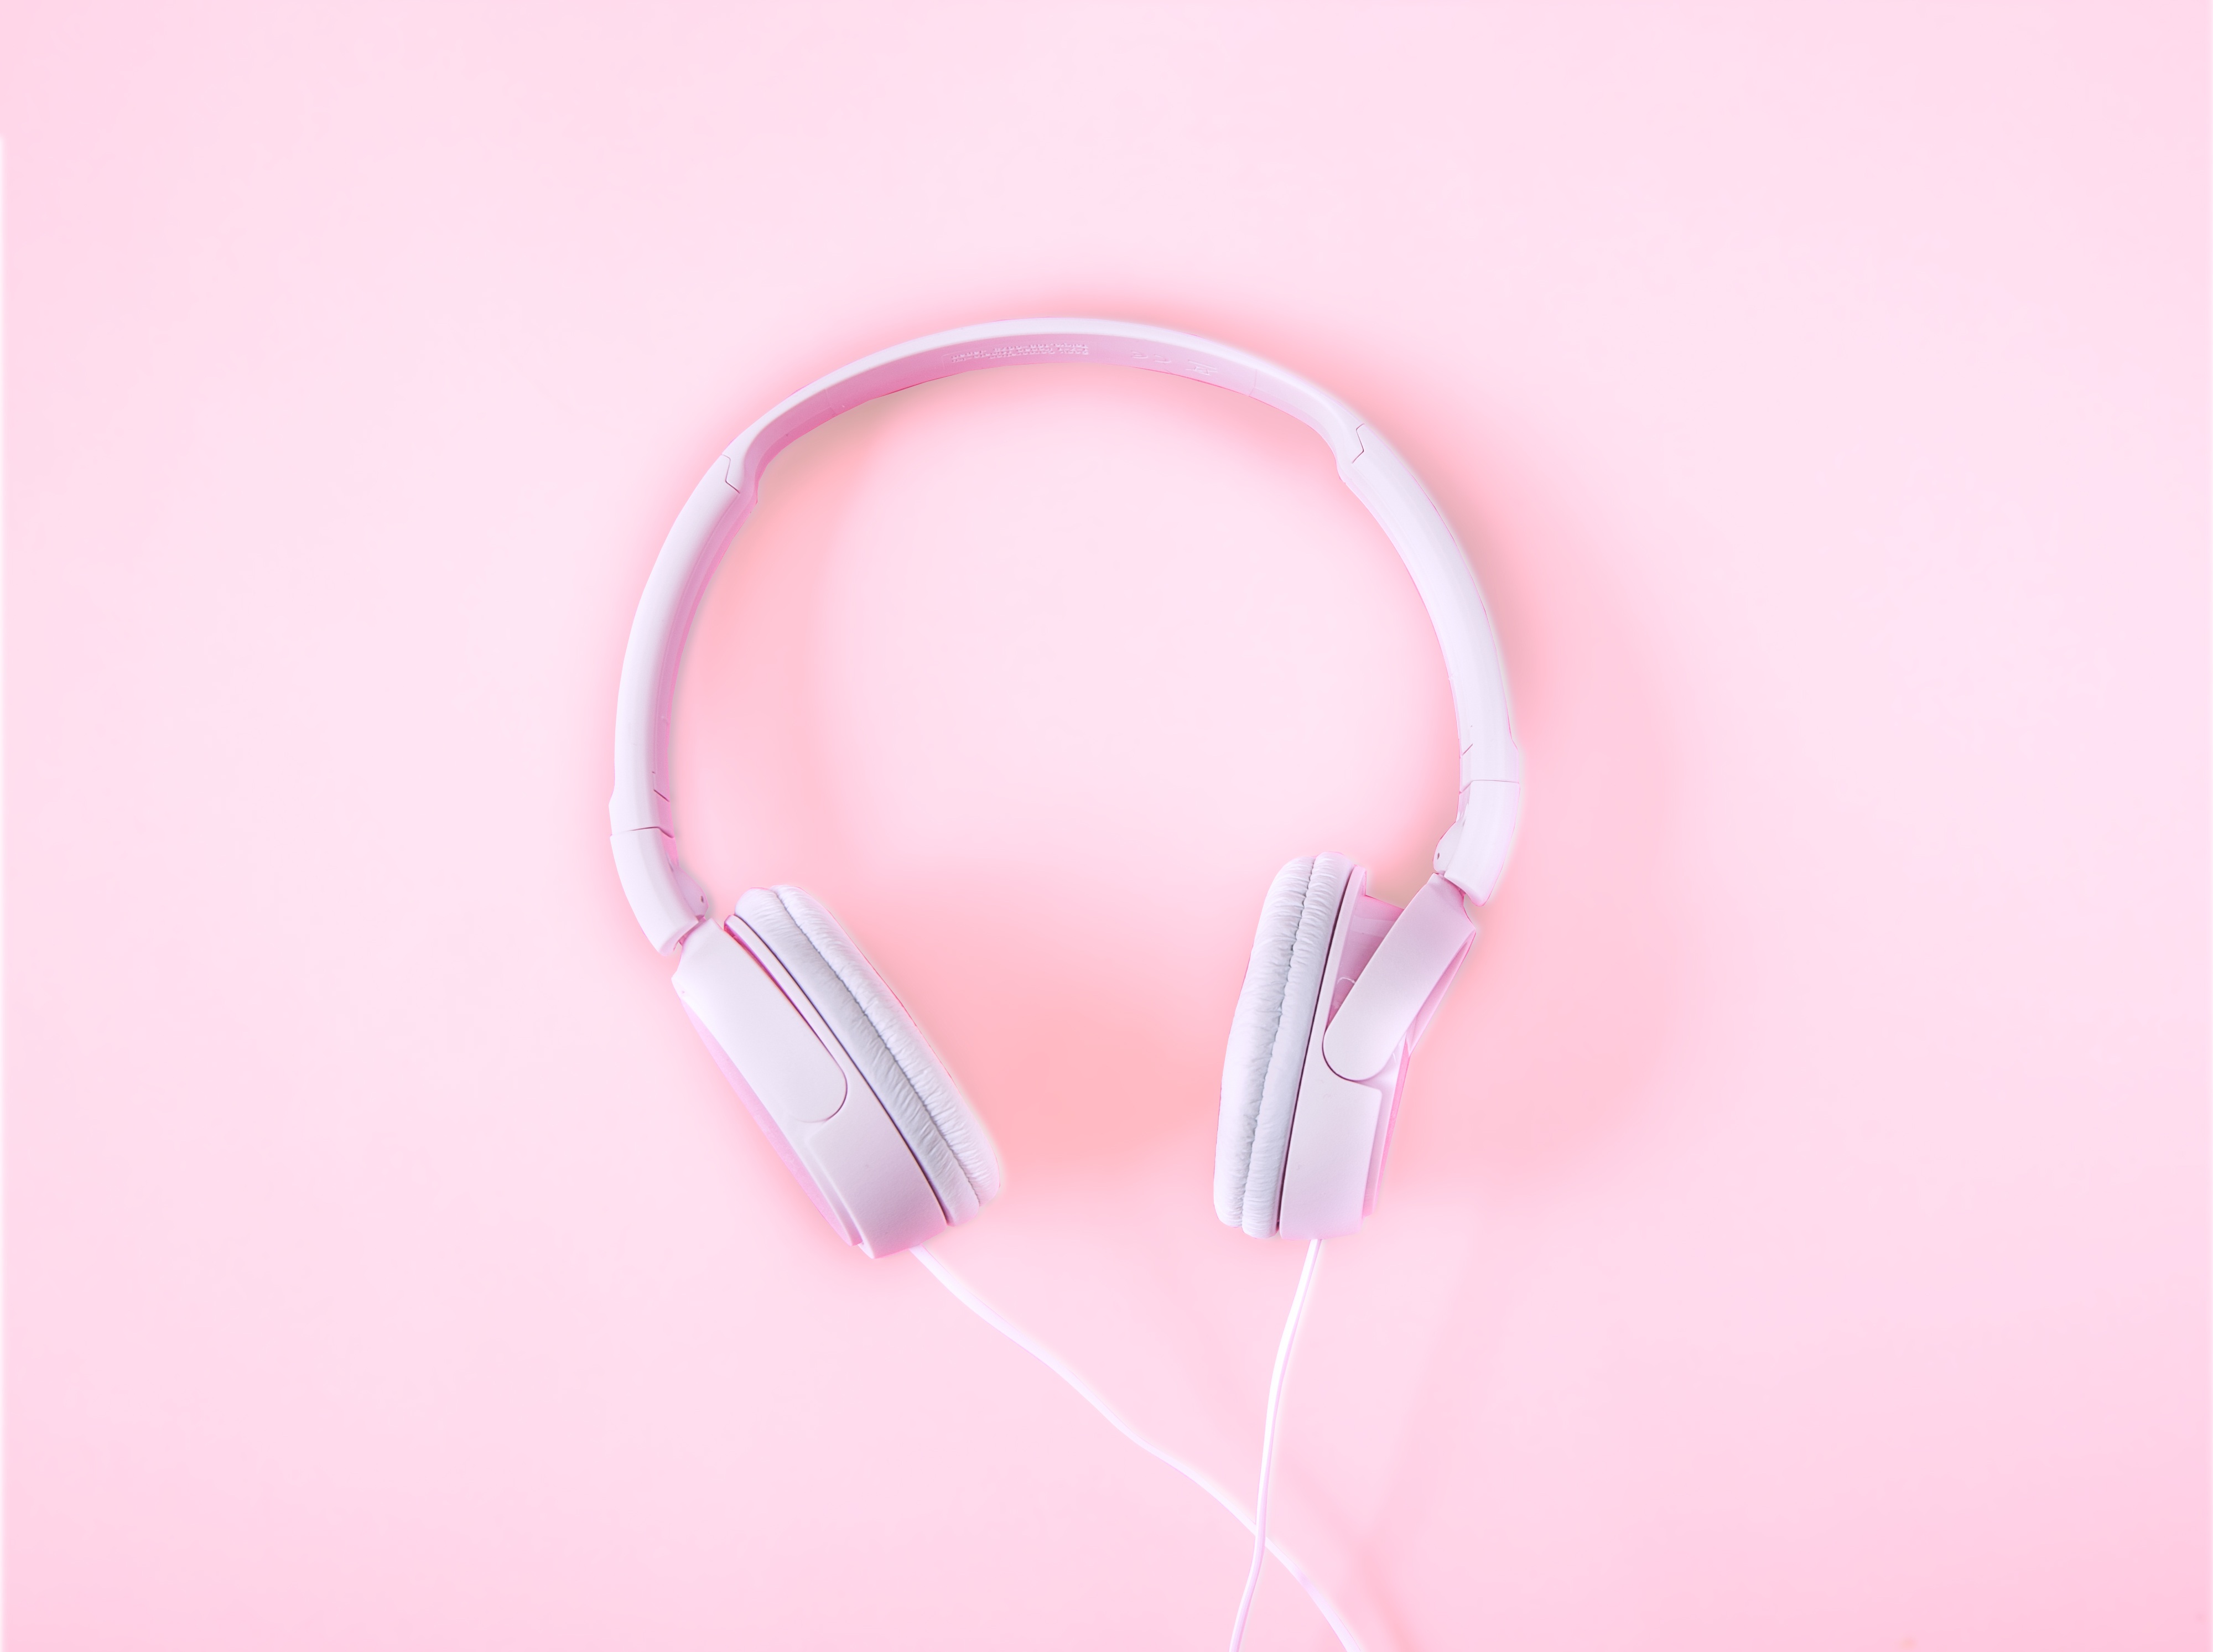 Free photo Headphones on a pink background